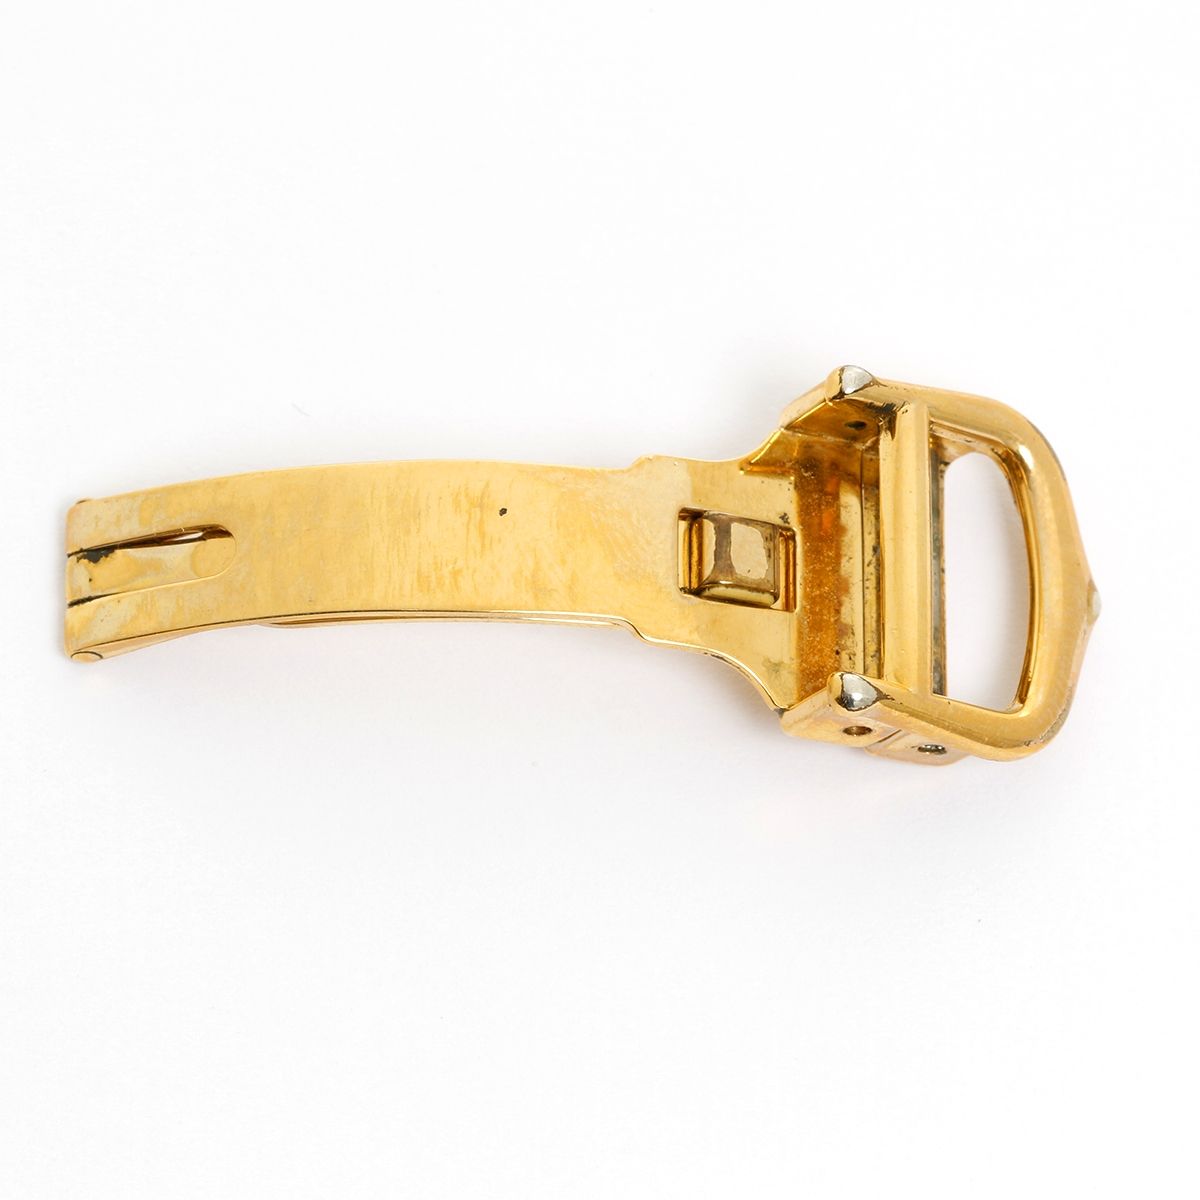 Cartier watch strap buckle instructions - Read before you buy